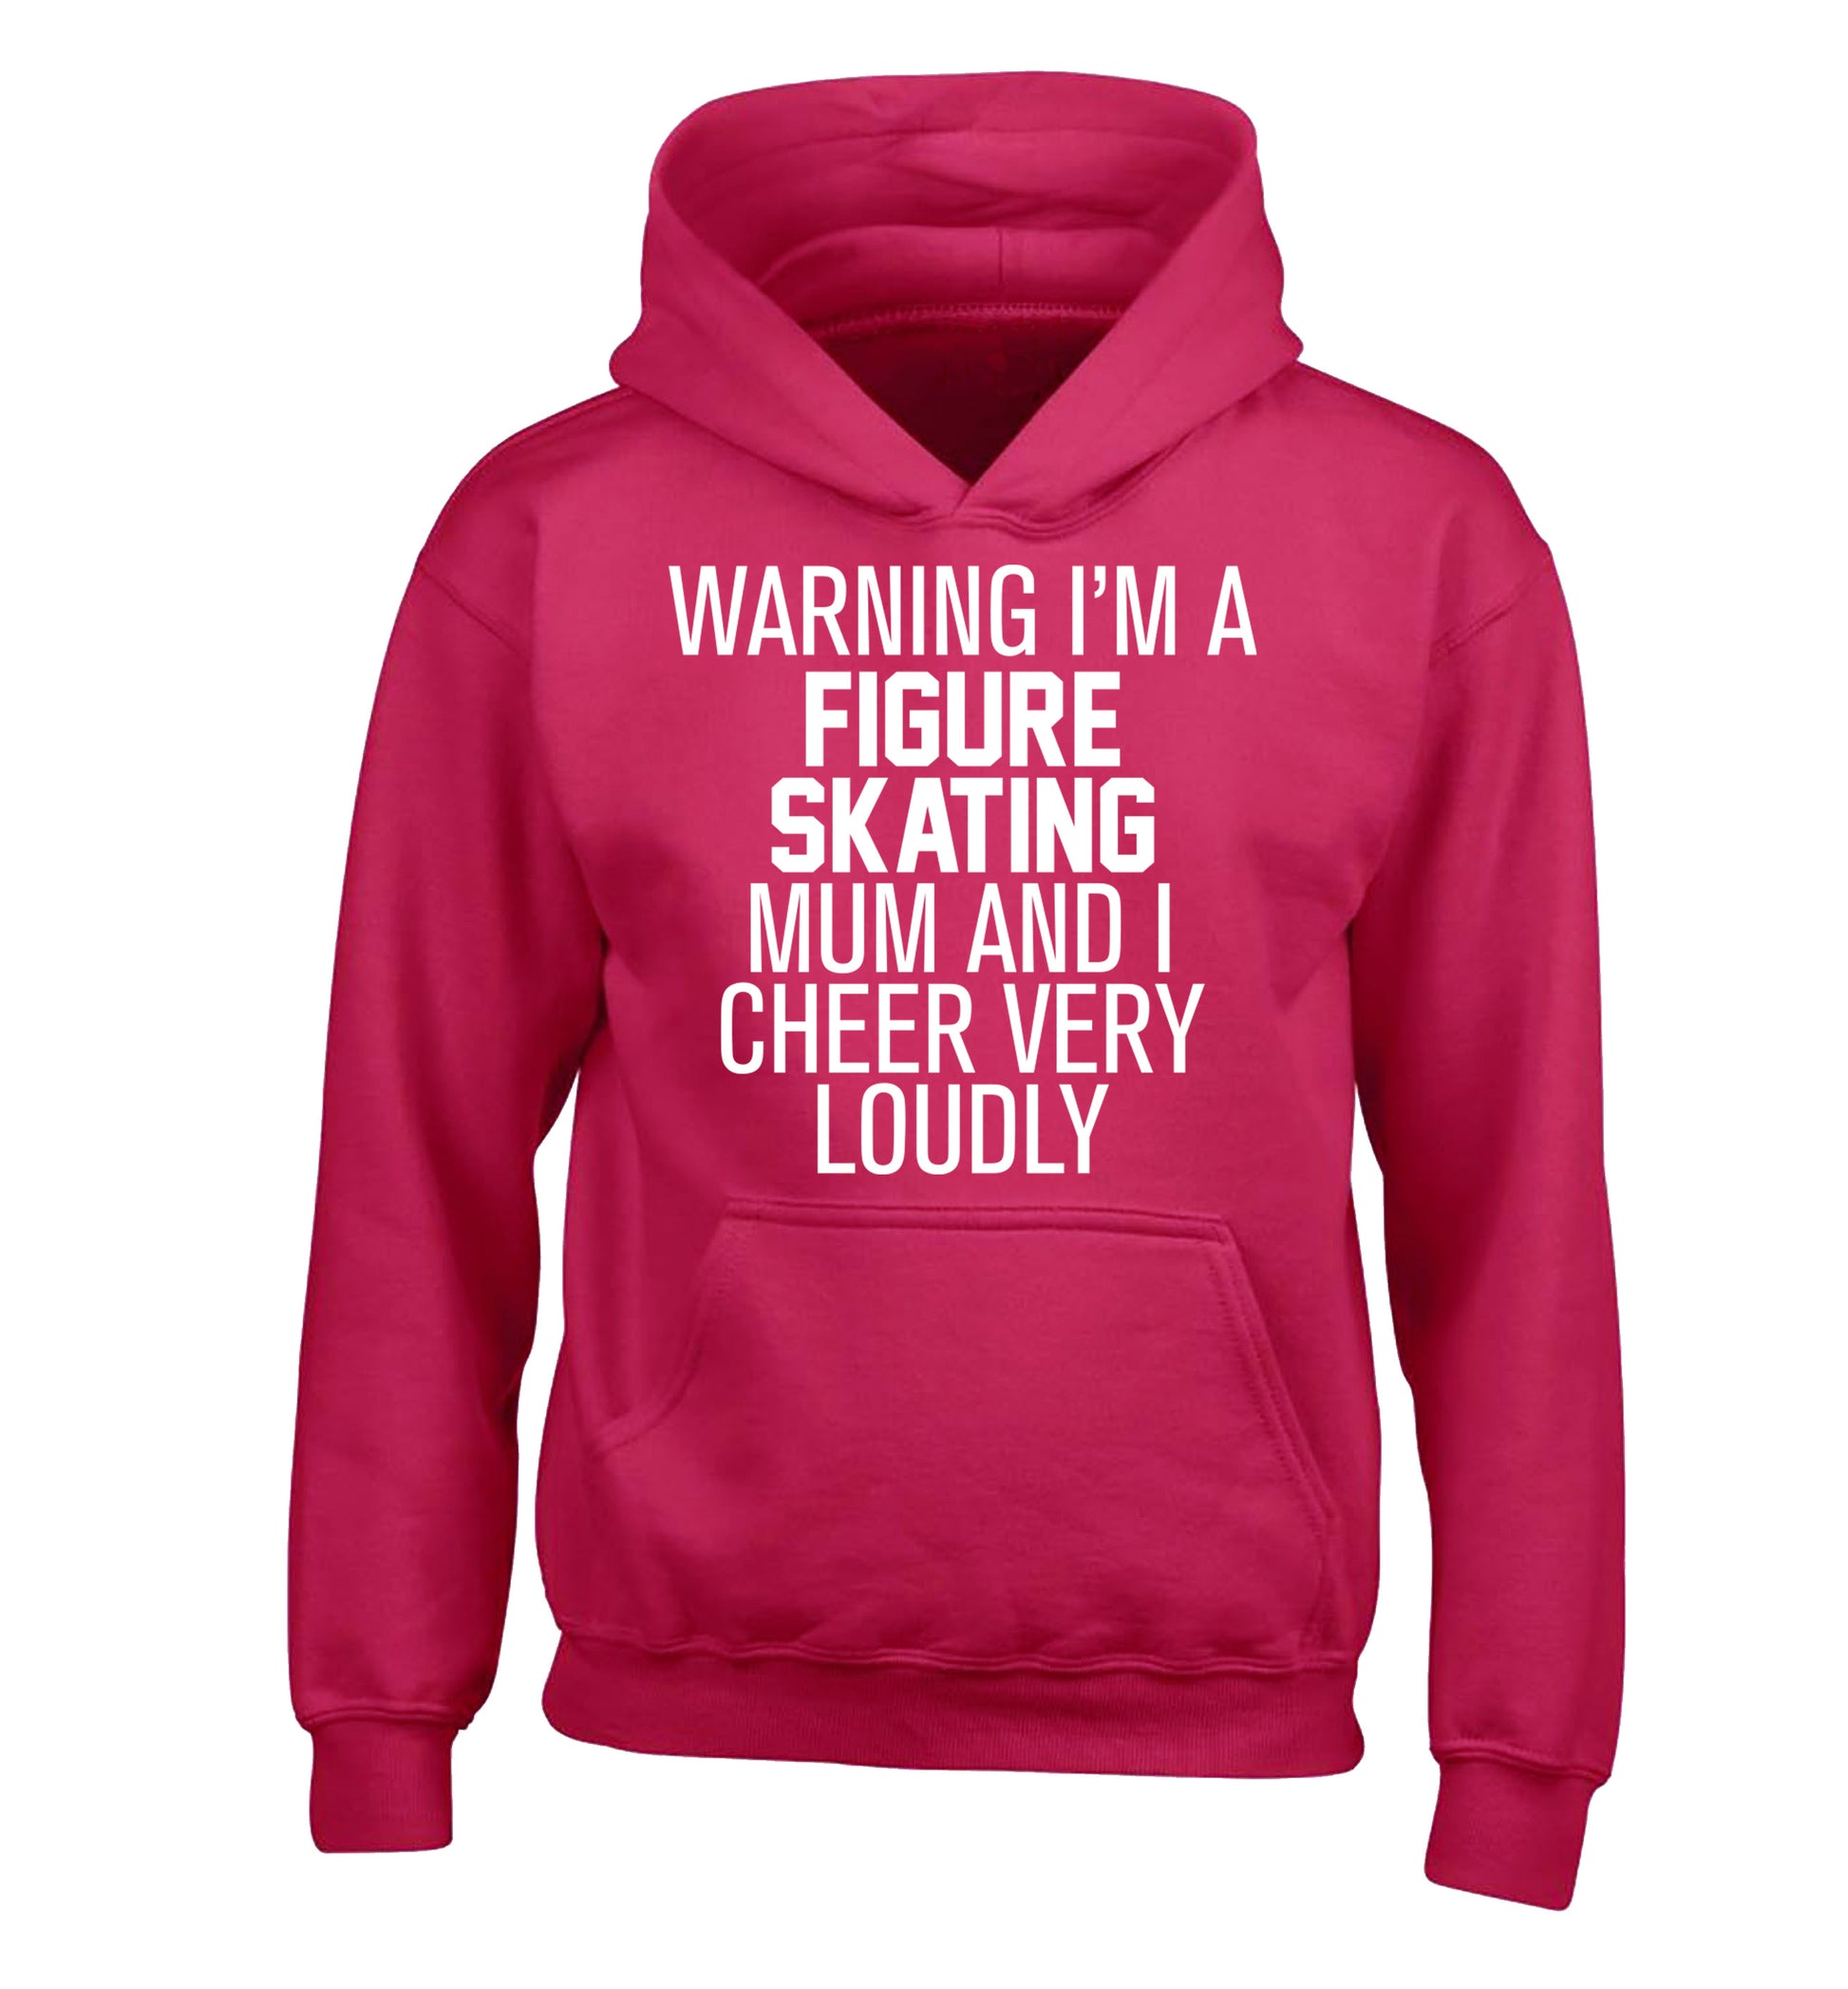 Warning I'm a figure skating mum and I cheer very loudly children's pink hoodie 12-14 Years